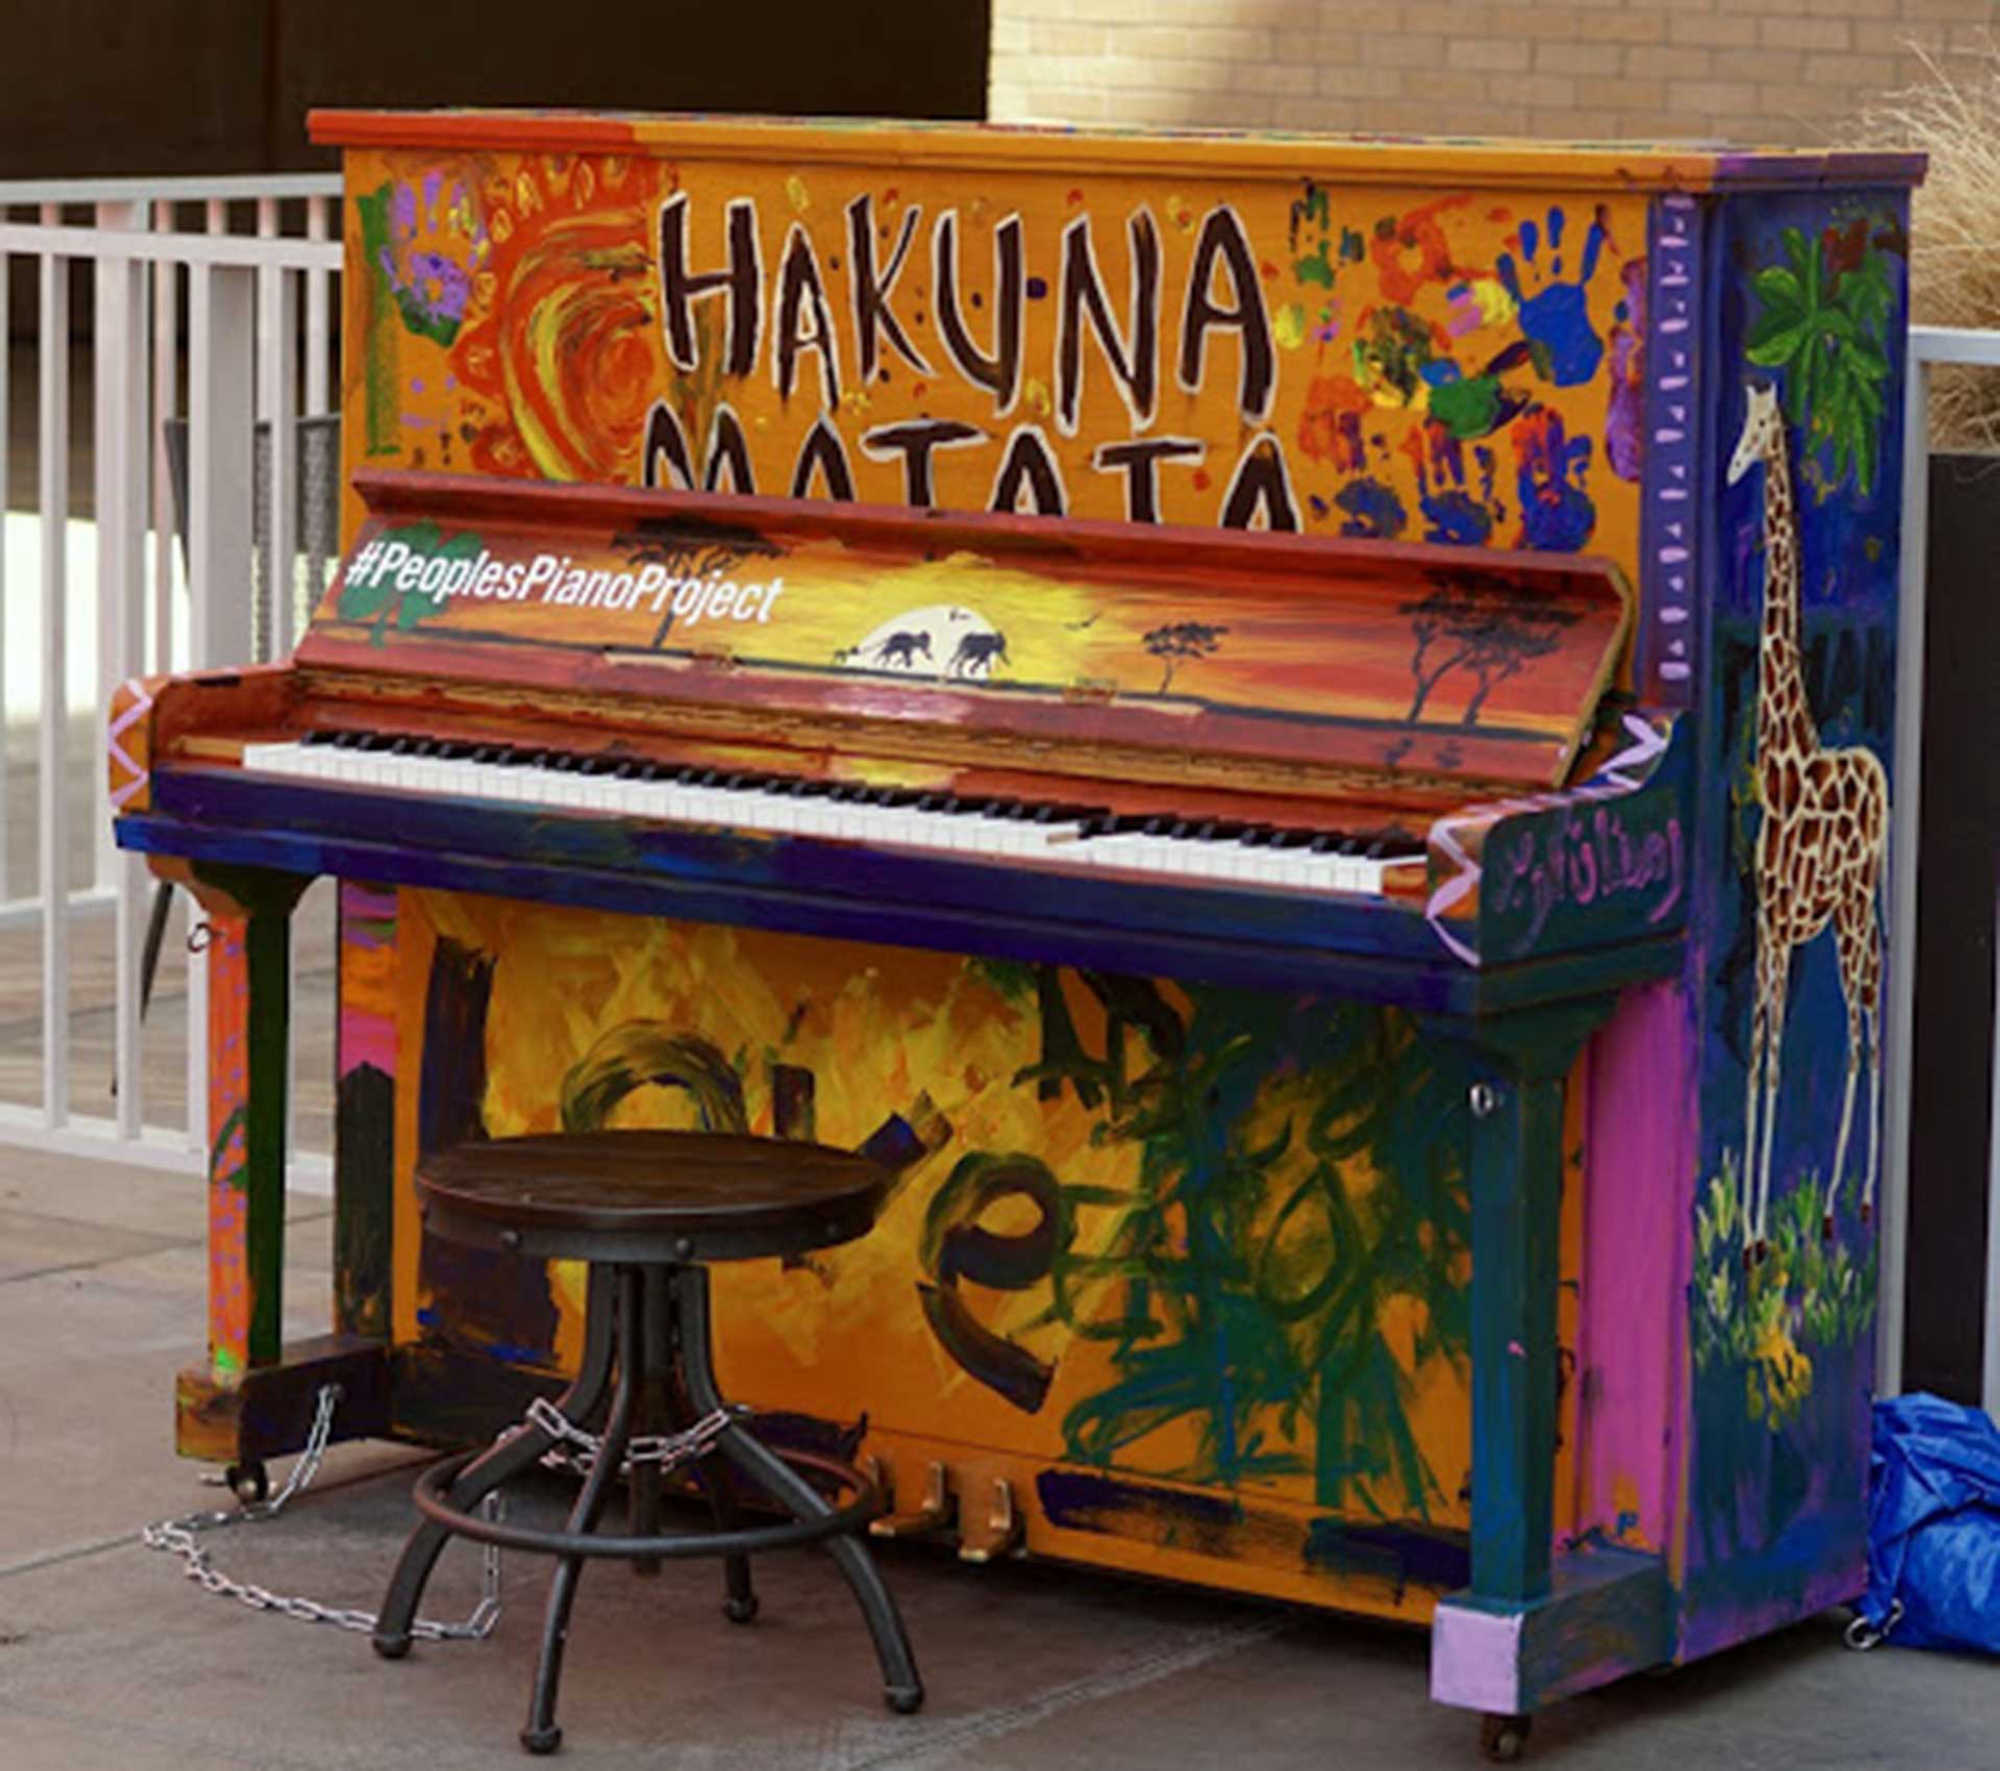 A piano painted by refugee children